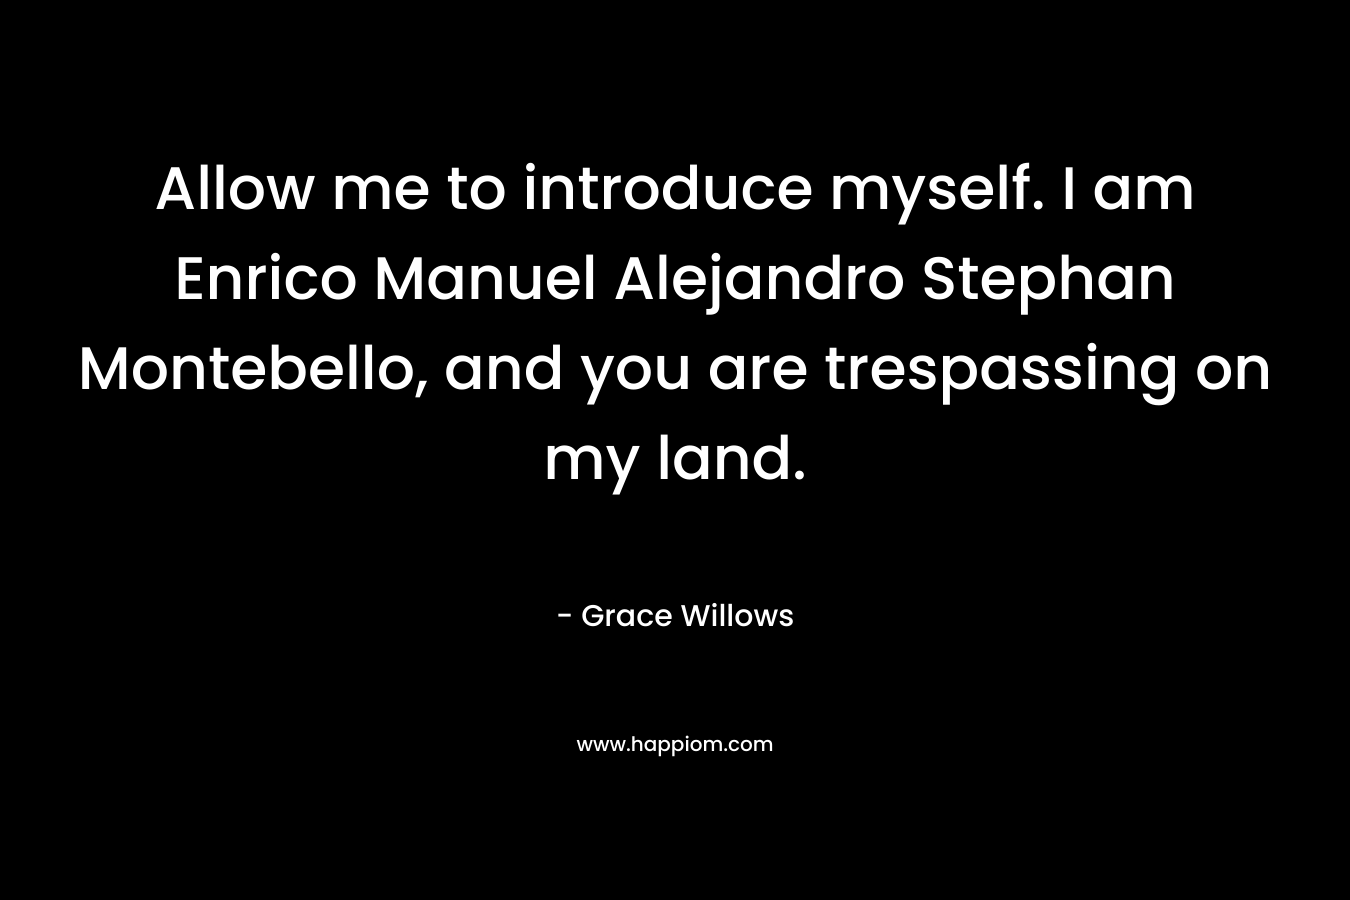 Allow me to introduce myself. I am Enrico Manuel Alejandro Stephan Montebello, and you are trespassing on my land.